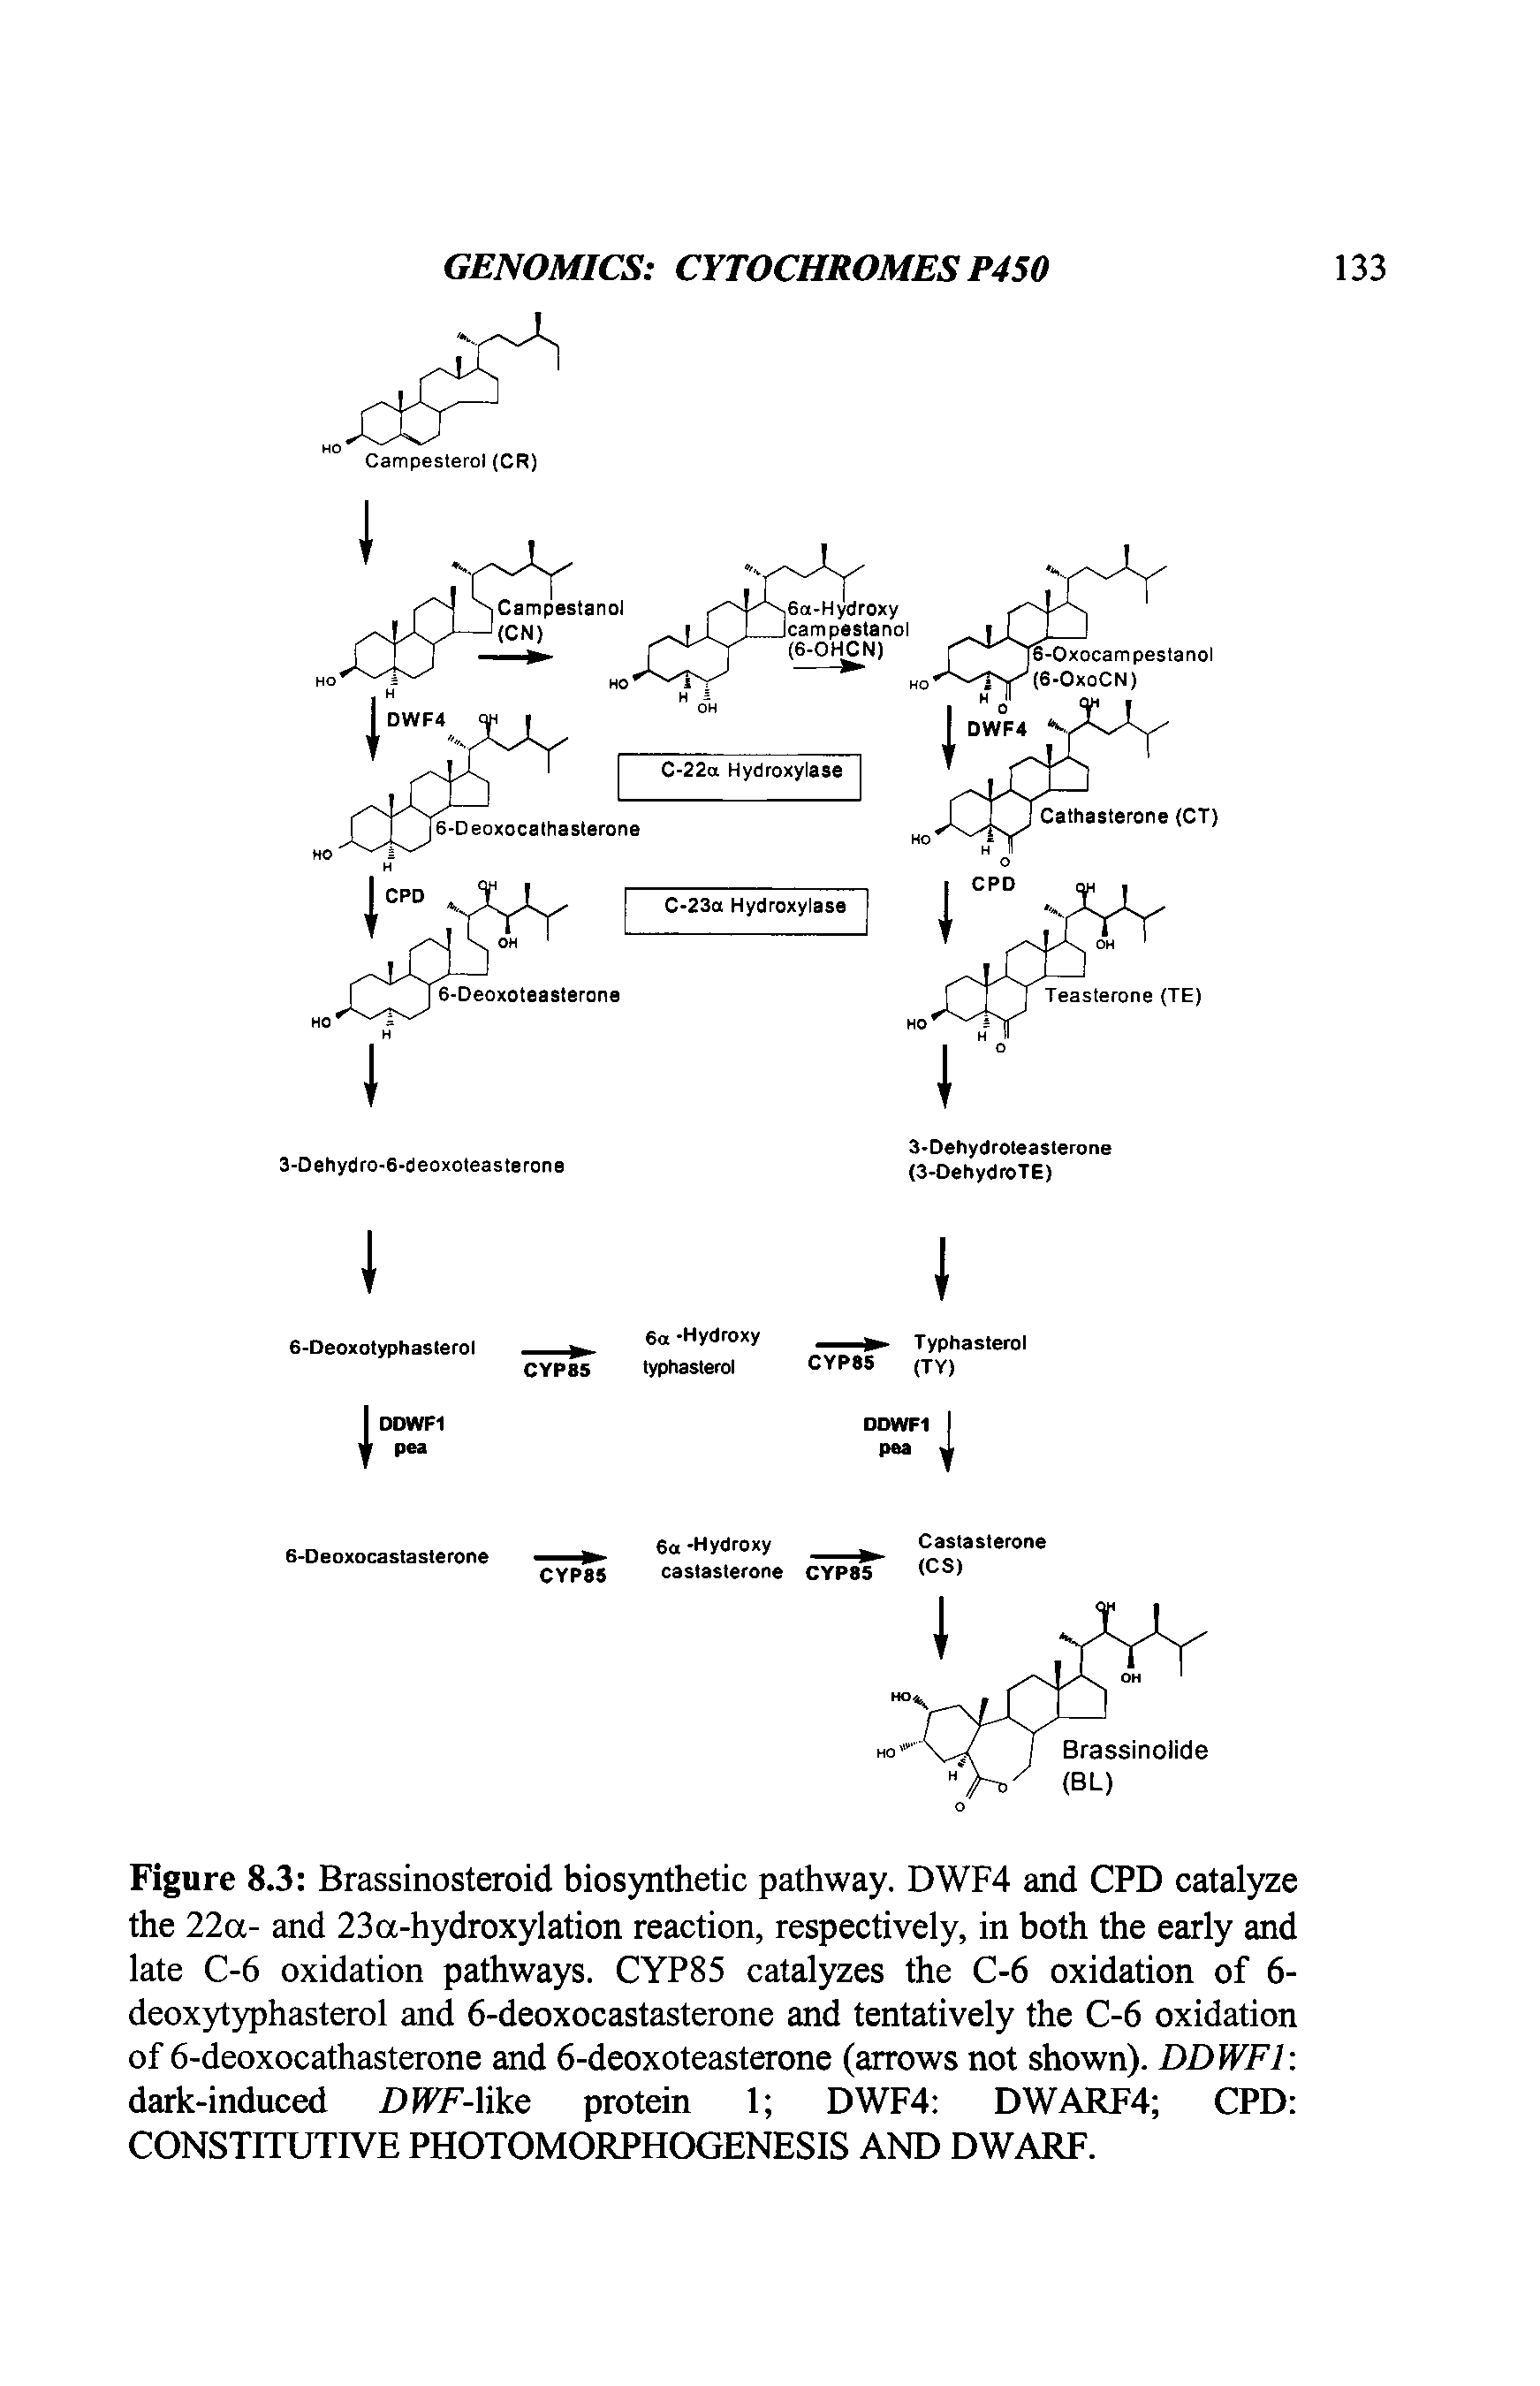 Figure 8.3 Brassinosteroid biosynthetic pathway. DWF4 and CPD catalyze the 22a- and 23a-hydroxylation reaction, respectively, in both the early and late C-6 oxidation pathways. CYP85 catalyzes the C-6 oxidation of 6-deoxytyphasterol and 6-deoxocastasterone and tentatively the C-6 oxidation of 6-deoxocathasterone and 6-deoxoteasterone (arrows not shown). DDWF1 dark-induced DIP/7-like protein 1 DWF4 DWARF4 CPD CONSTITUTIVE PHOTOMORPHOGENESIS AND DWARF.